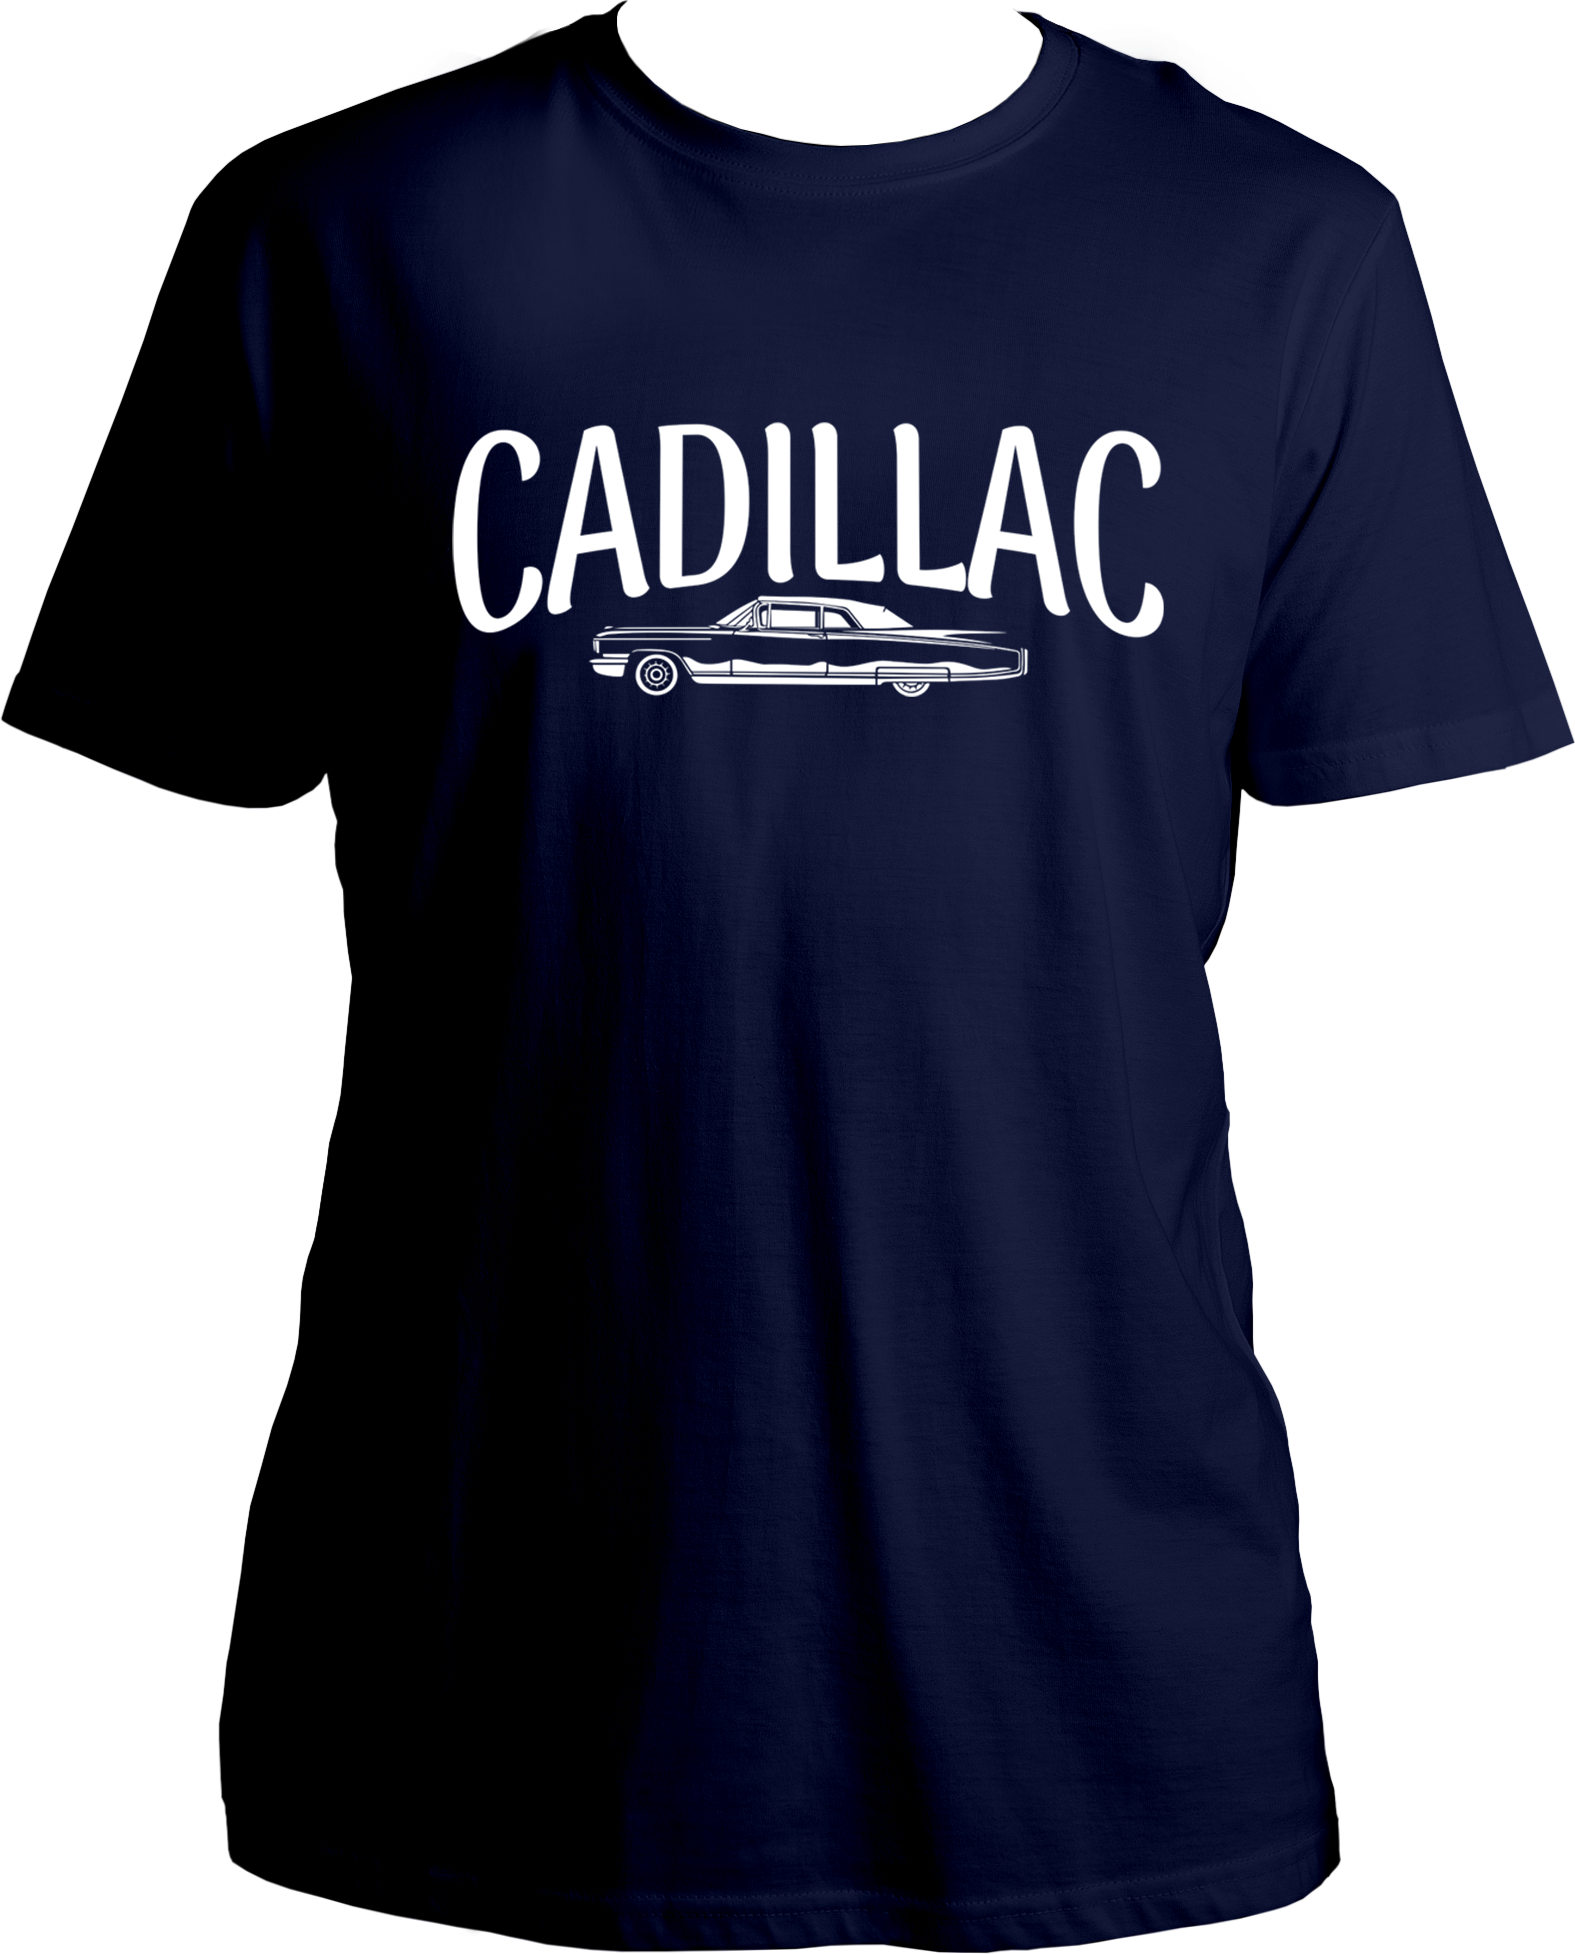 Welcome to the Sidhu Moose Wala Collection, where style meets the rhythm of the streets! Introducing our Unisex "Cadillac" T-Shirt, inspired by the iconic track that echoes through the hearts of Sidhu Moose Wala fans.